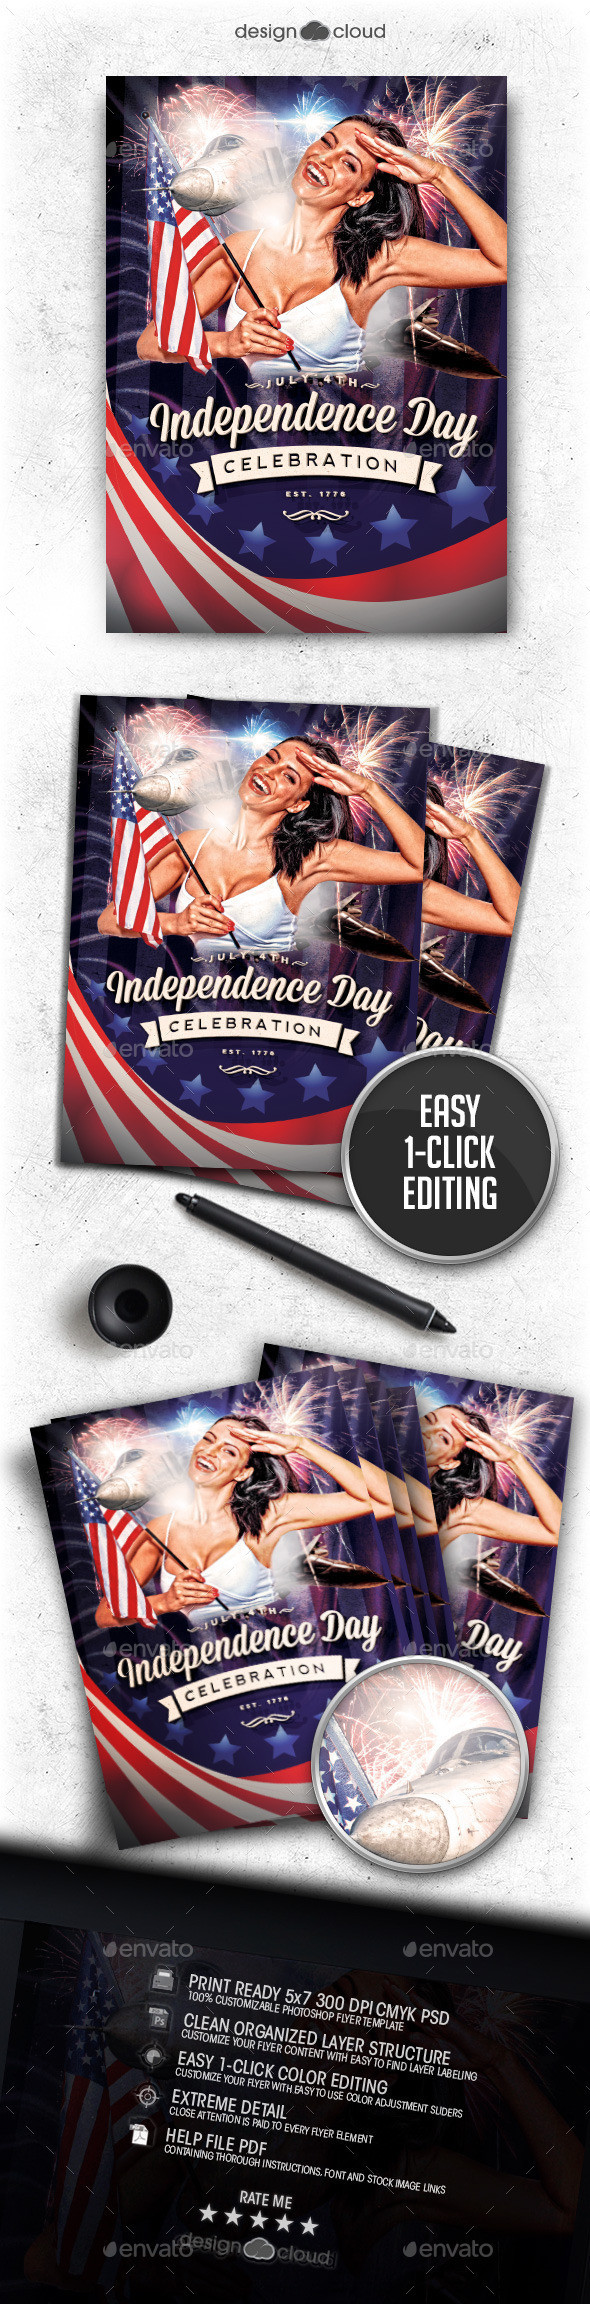 Preview independence day july 4 vol 03 flyer template